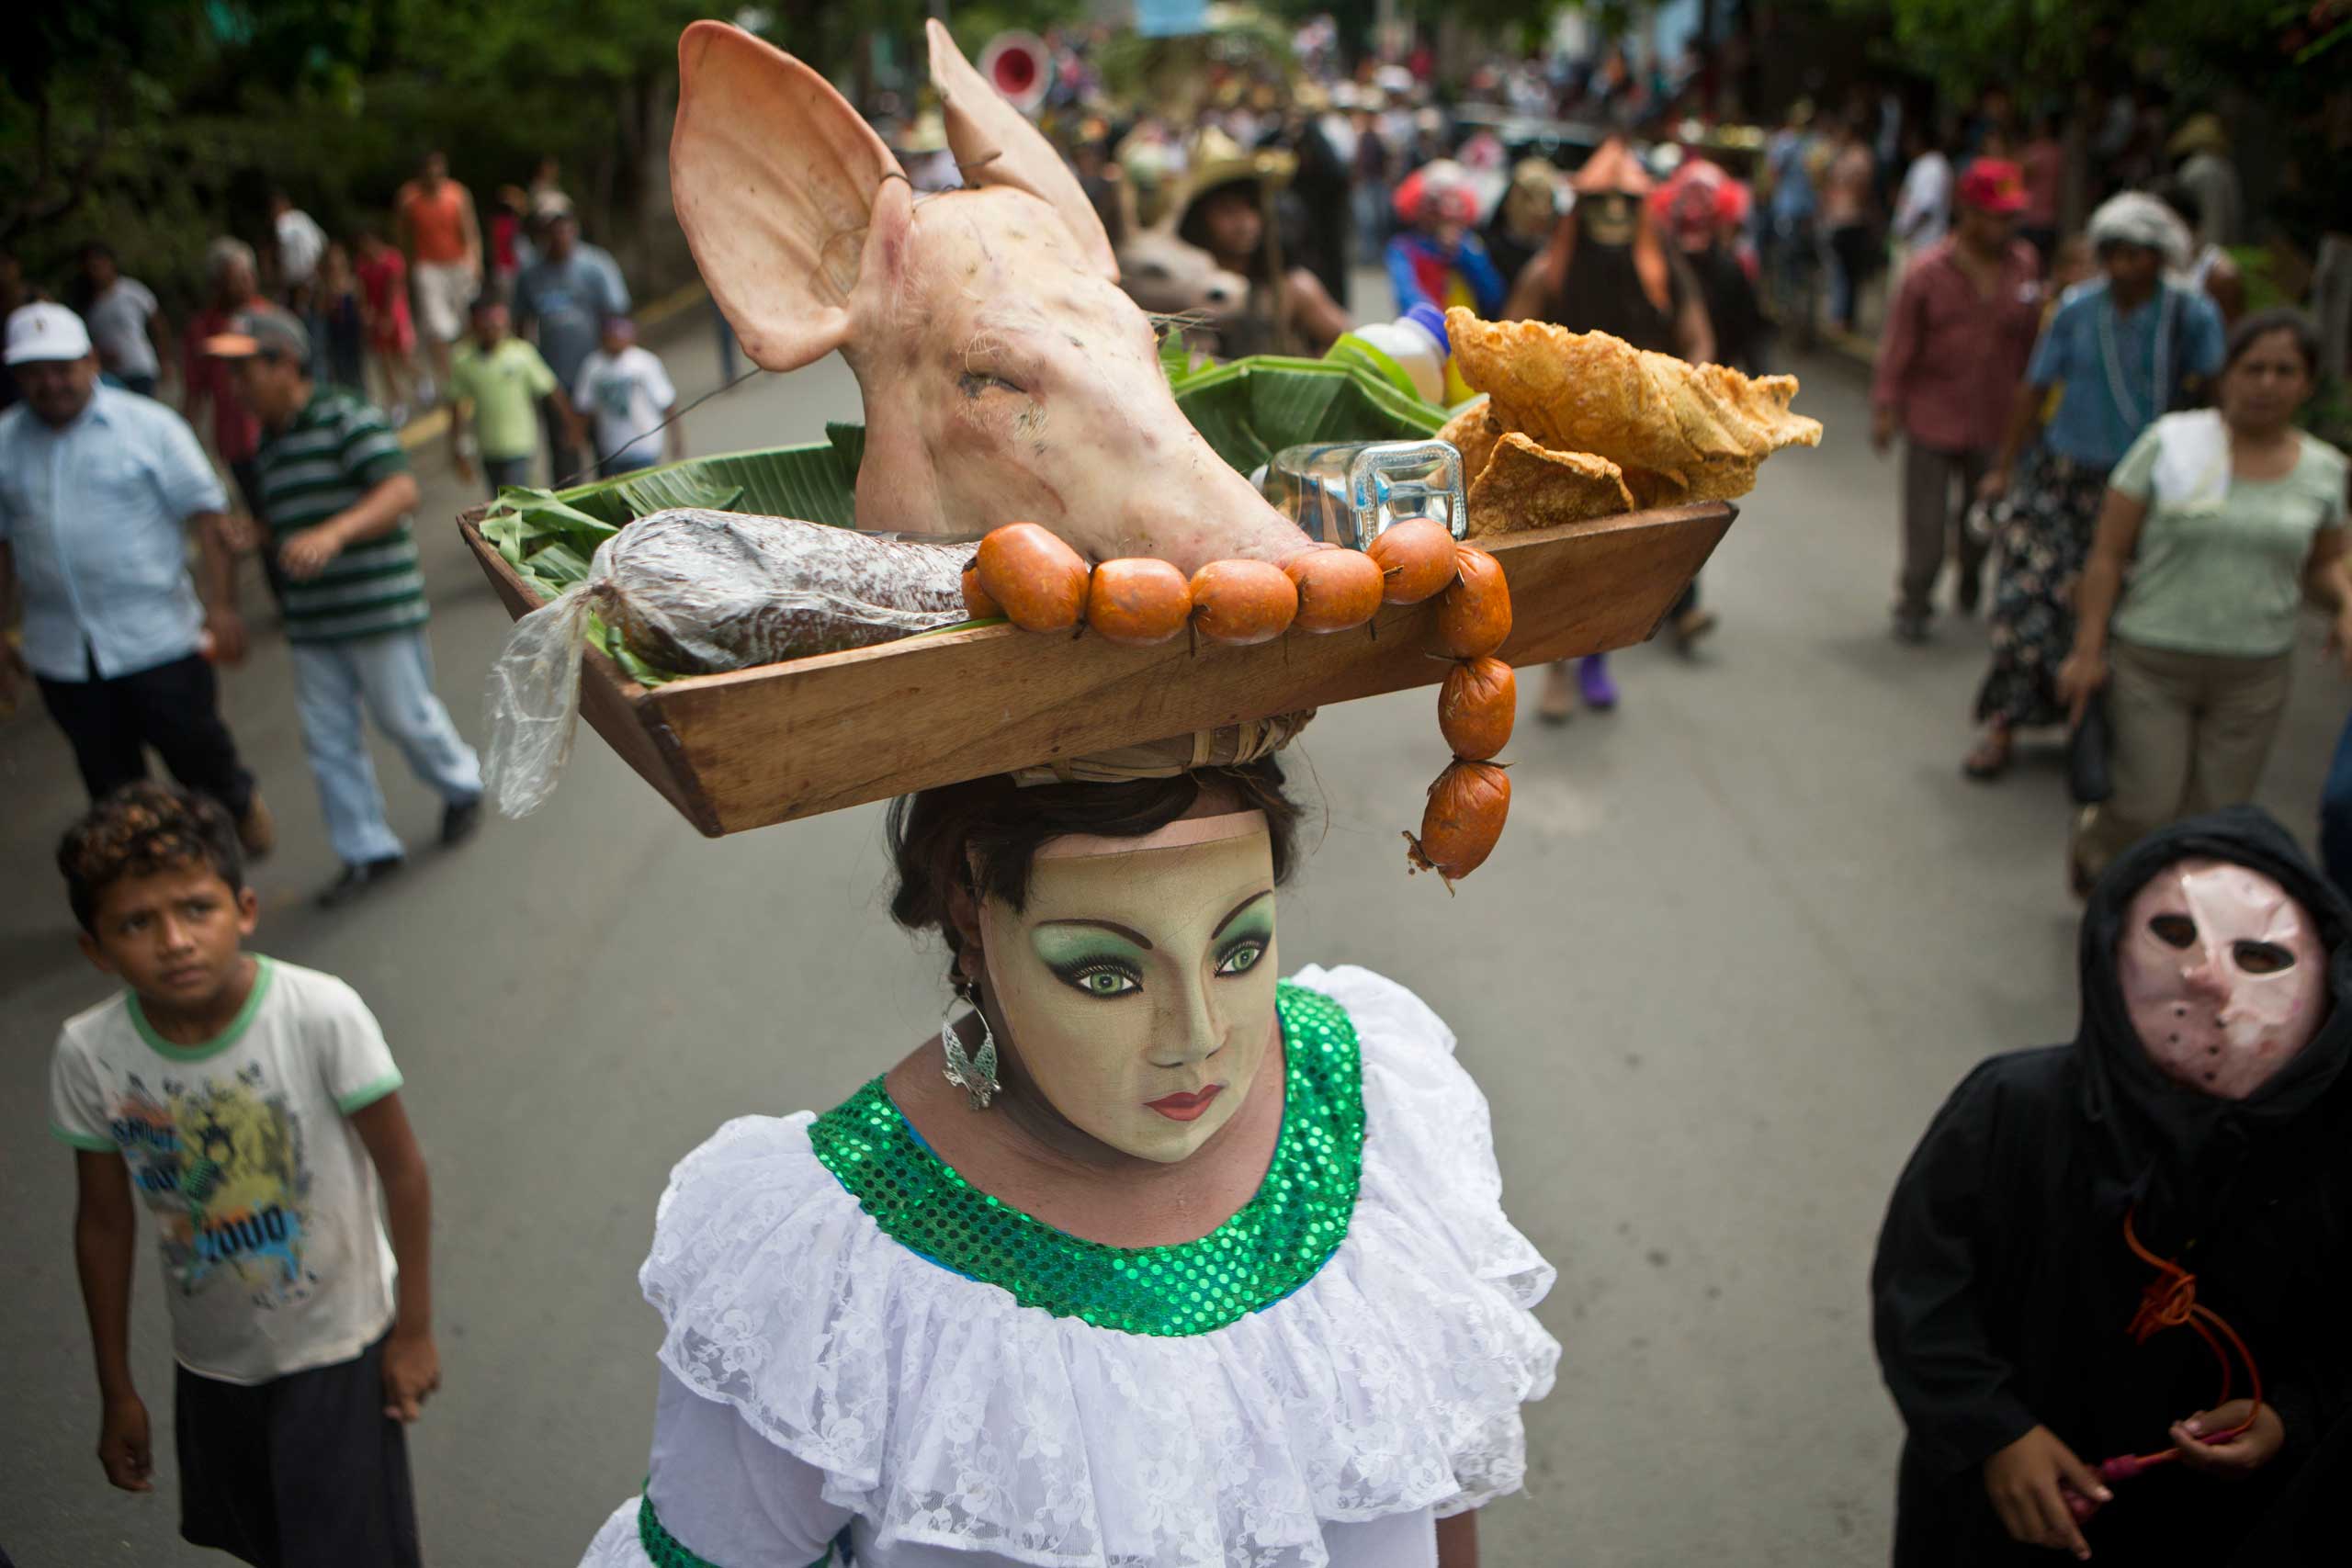 Oct 26, 2014. A man dressed as a woman, carries a pig's head on a platter balanced on his head during the celebration of Torovenado in honor of Masaya's patron saint, San Jerónimo, in Masaya, Nicaragua. Torovenado is a satirical dance festival that ridicules social and political characters since the early years of the Spanish conquest.